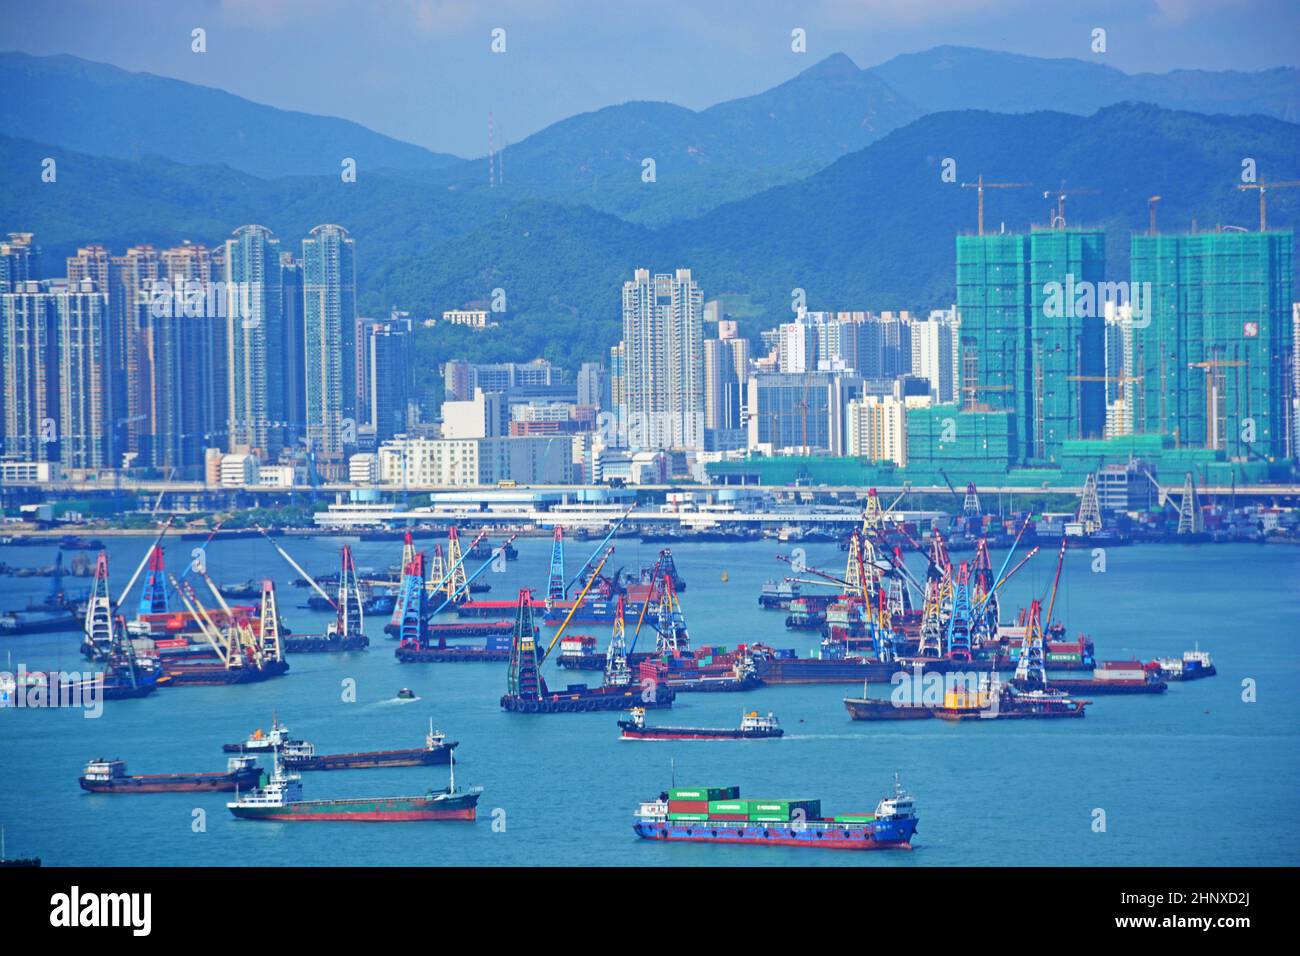 Cargo ships in the bay of Hong Kong await loading and unloading of cargo from their hulls Stock Photo